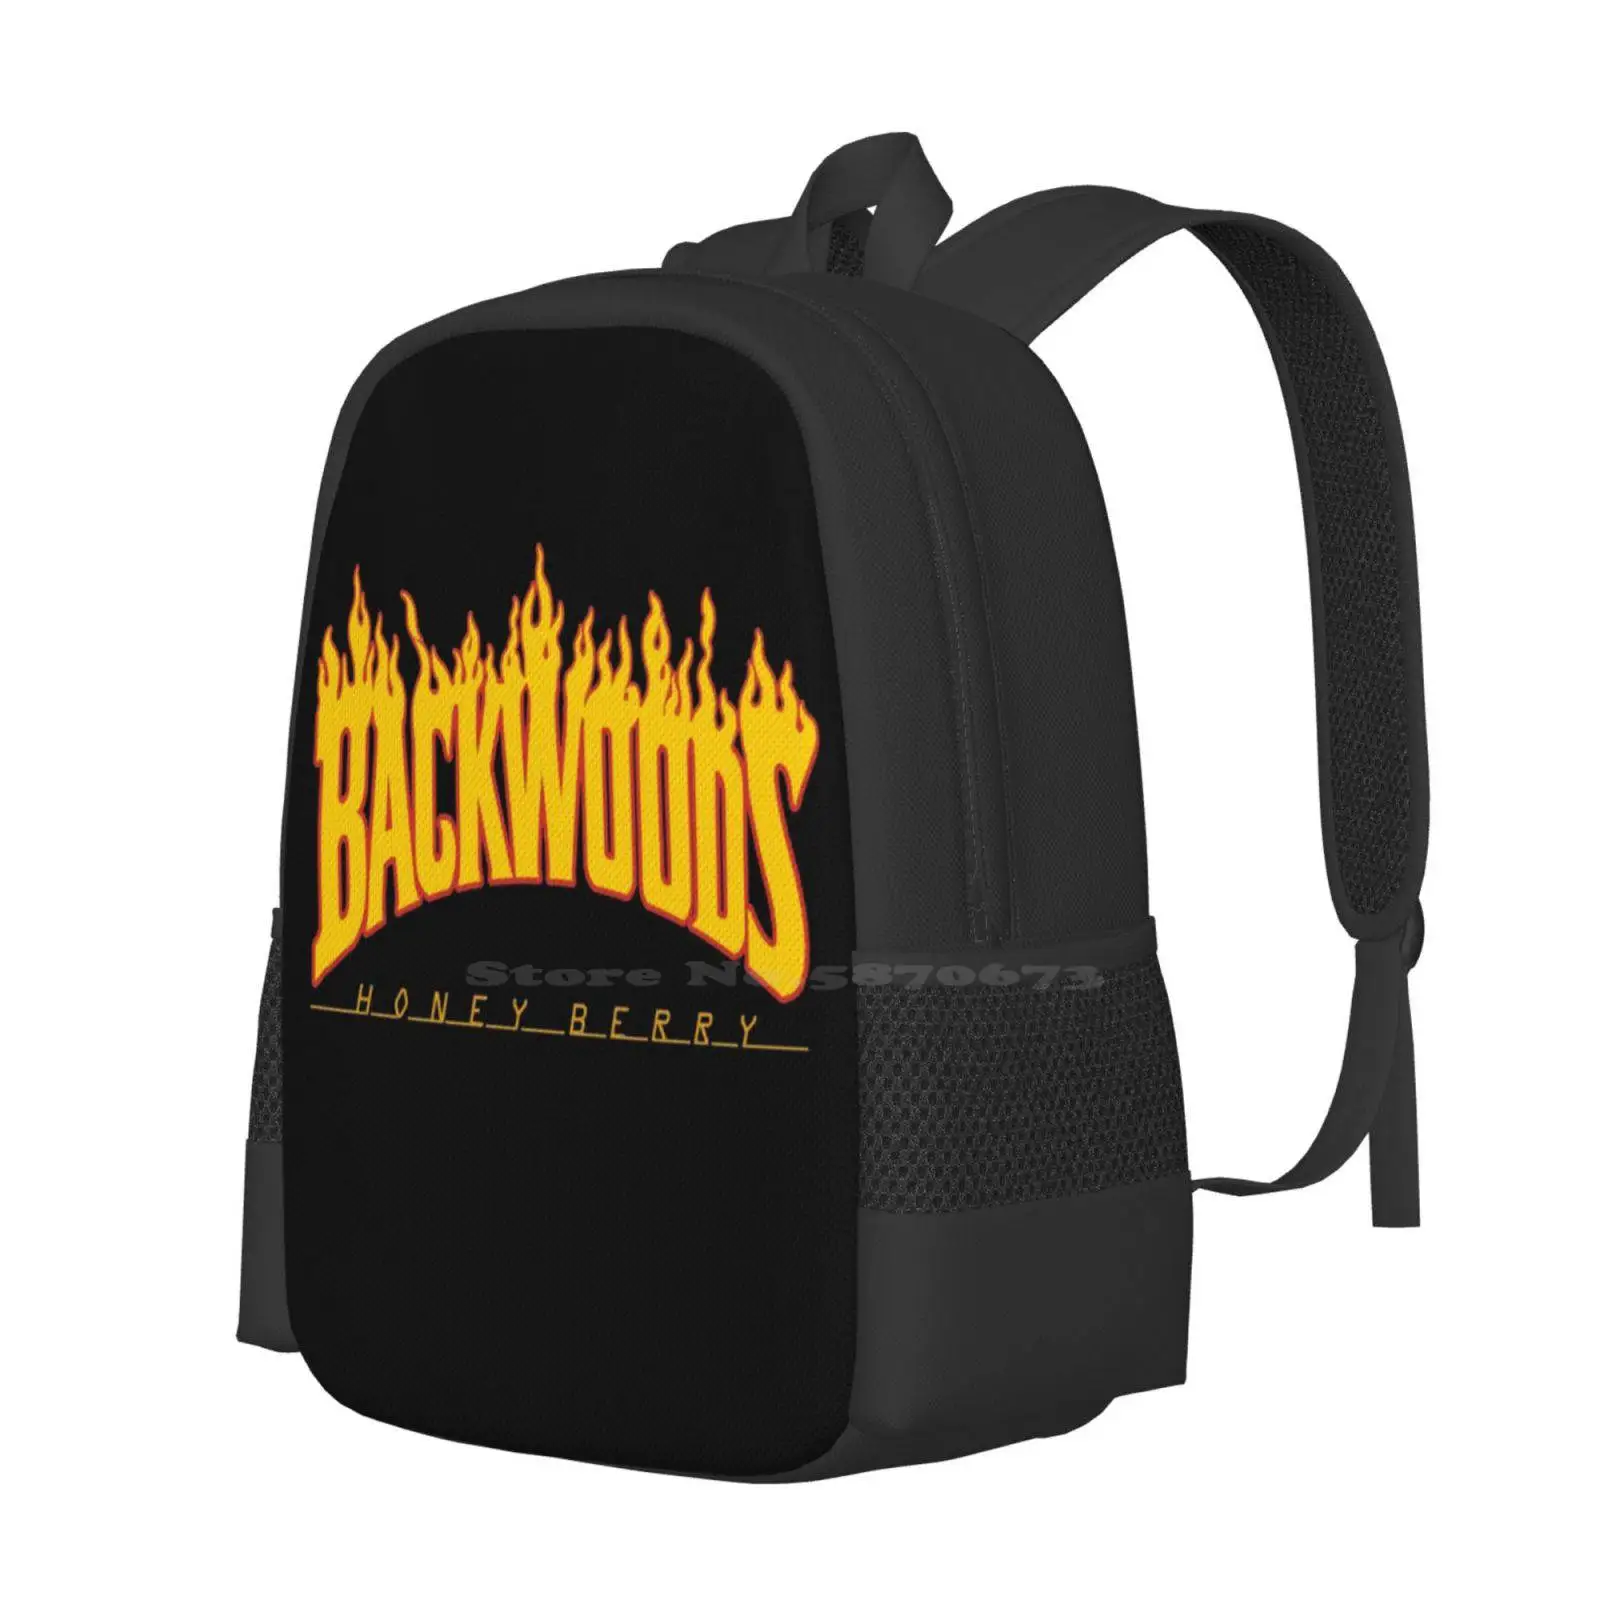 Small Backpack. Backwoods With Led Lighting Patterns